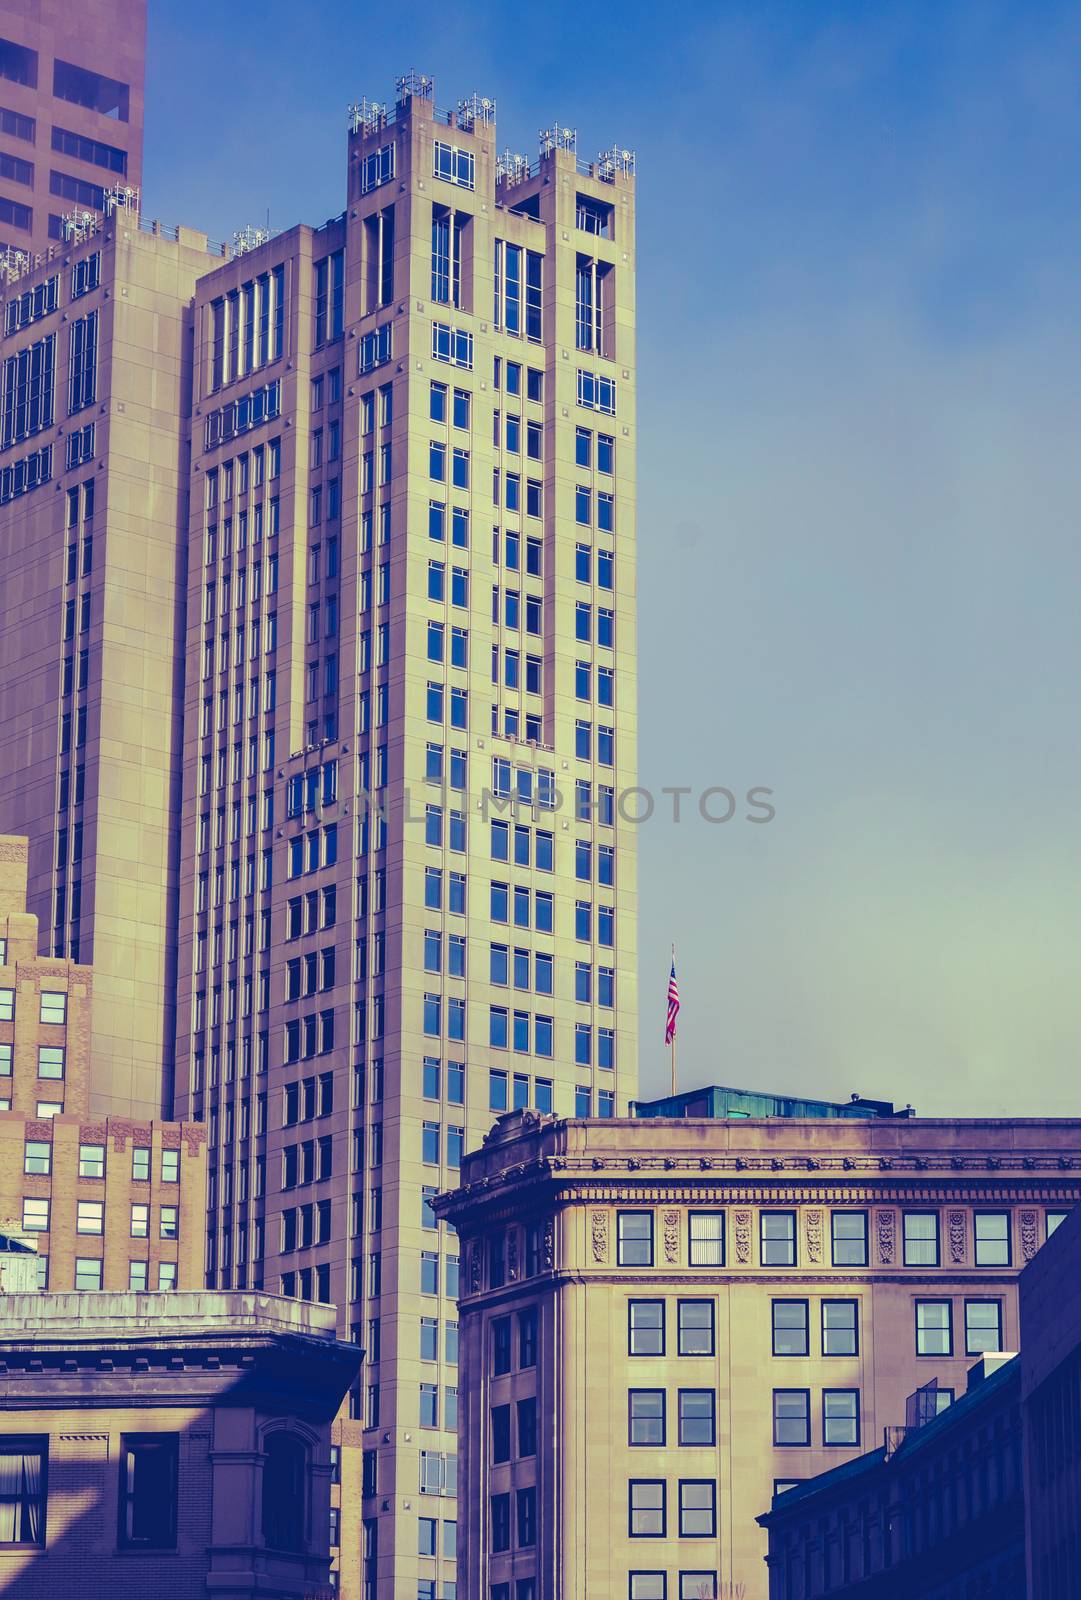 Retro Vintage Style Photo Of The Historic Buildings Of Downtown Boston, Massachusetts